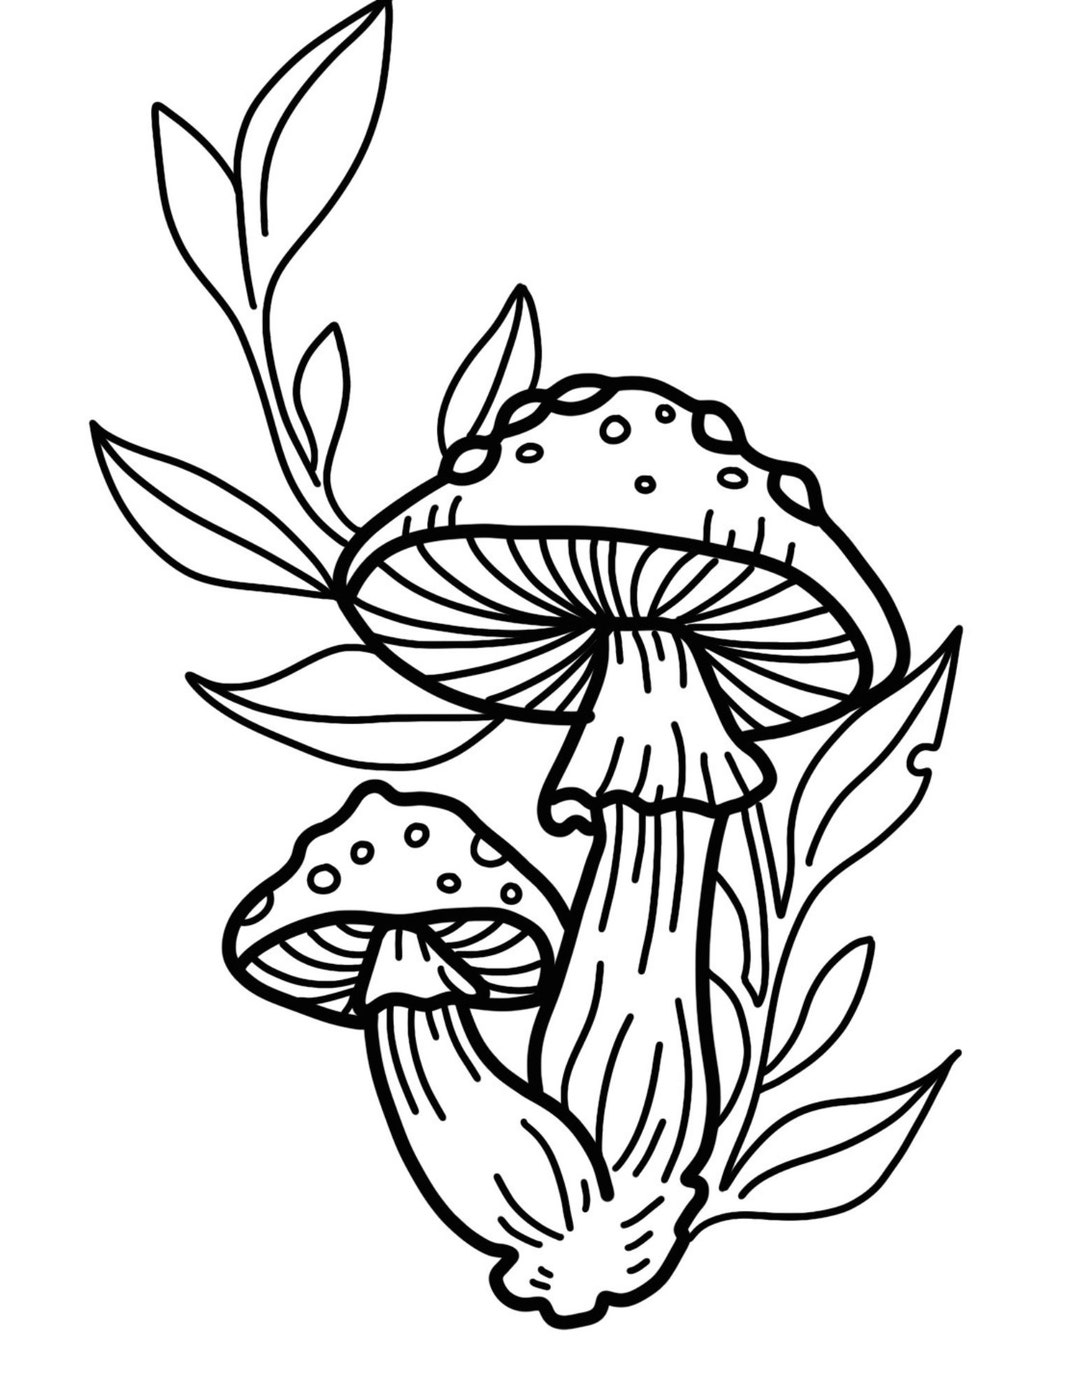 Two Mushrooms With Plants Coloring Page Cottage Core Coloring - Etsy